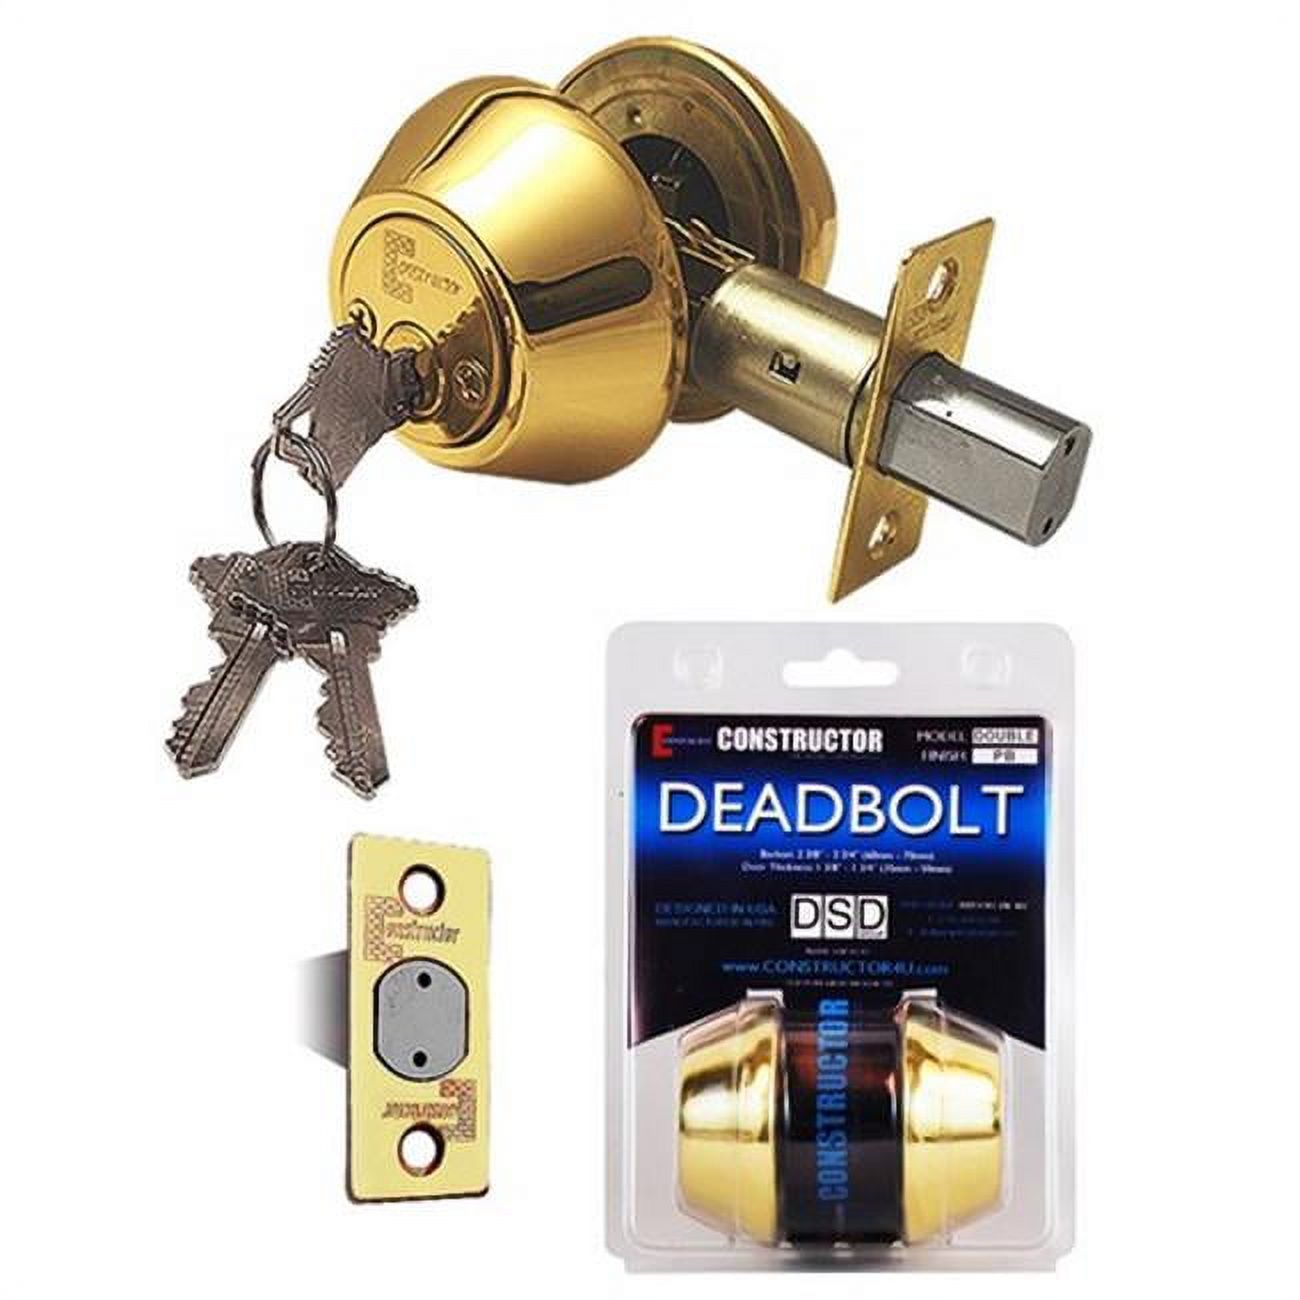 Constructor Deadbolt Door Lock Set with Double Cylinder Polished Brass Finish - image 1 of 1